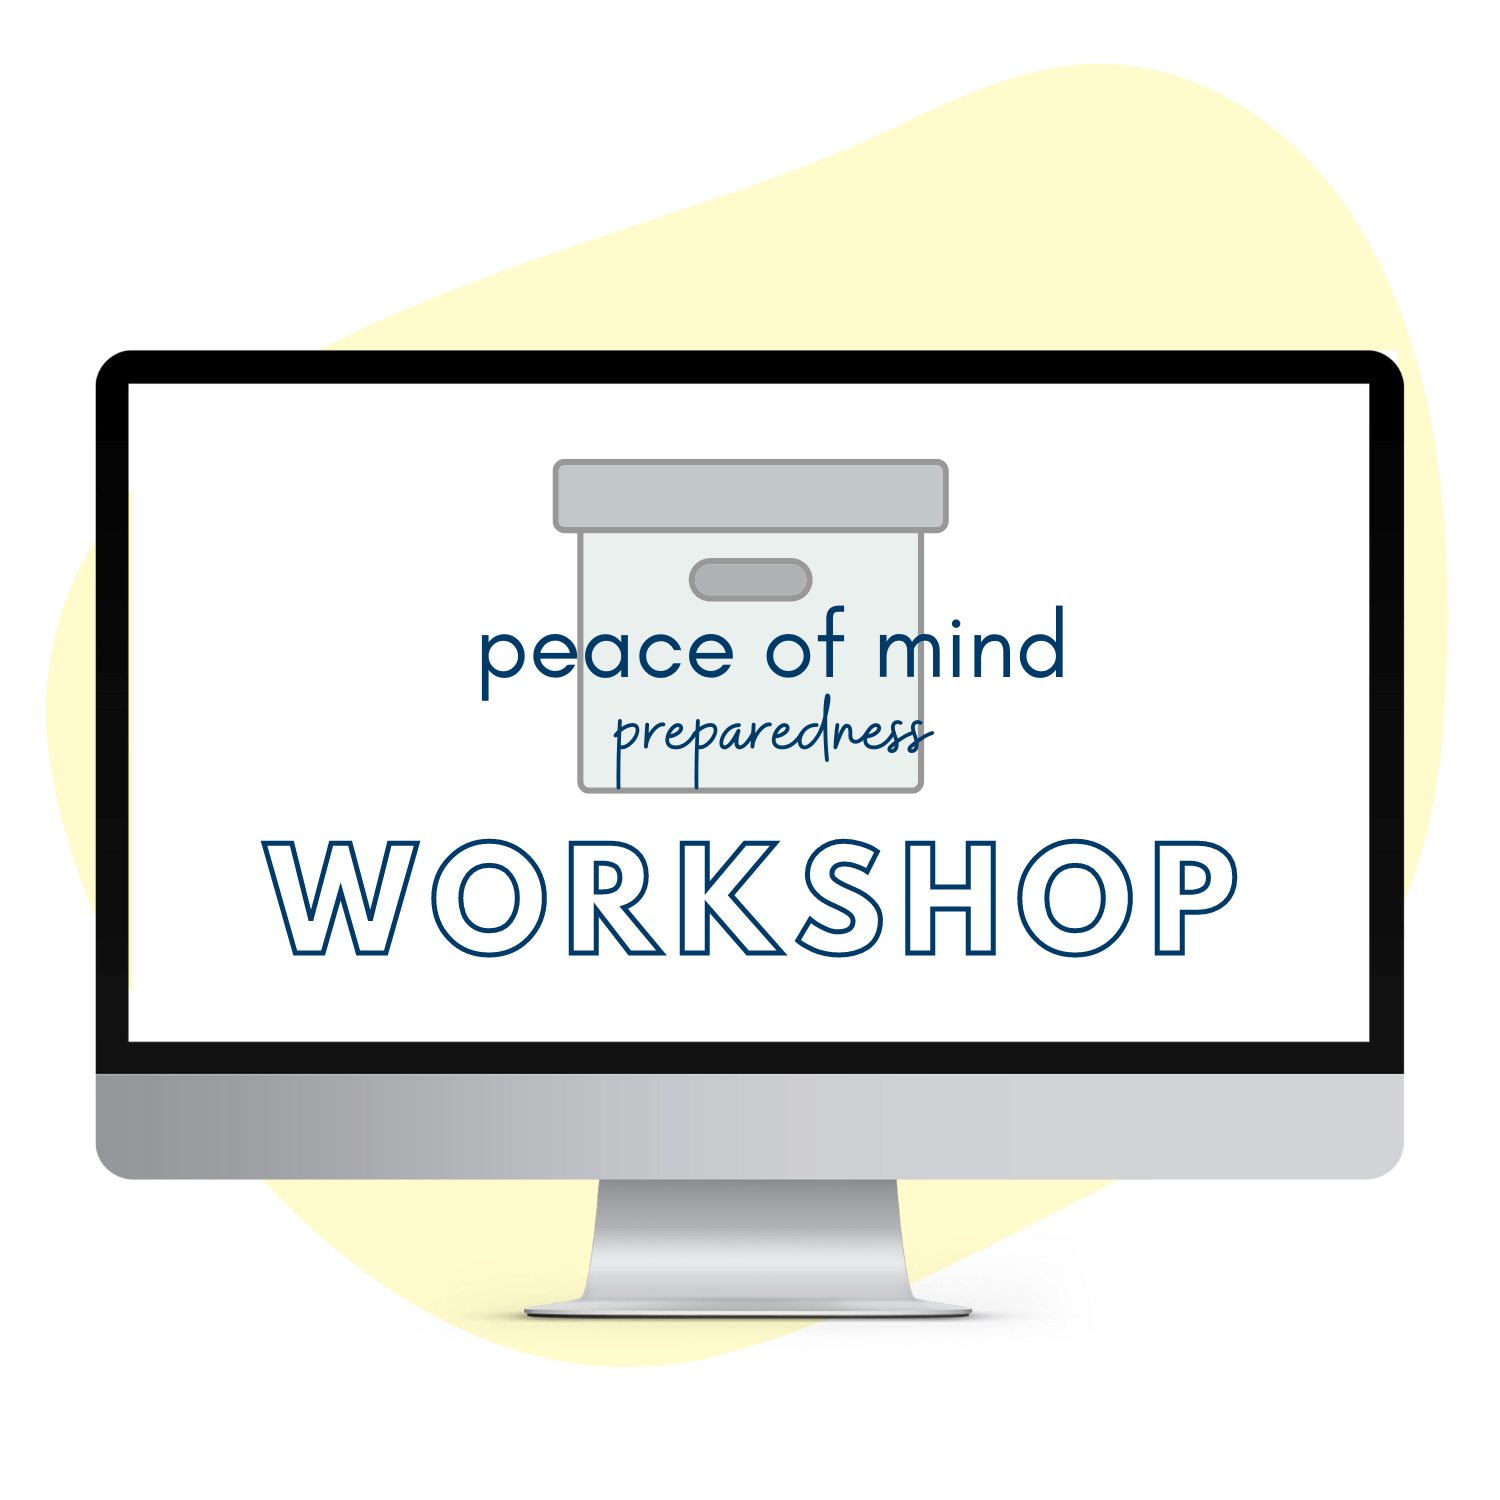 peace of mind workshop logo on computer screen